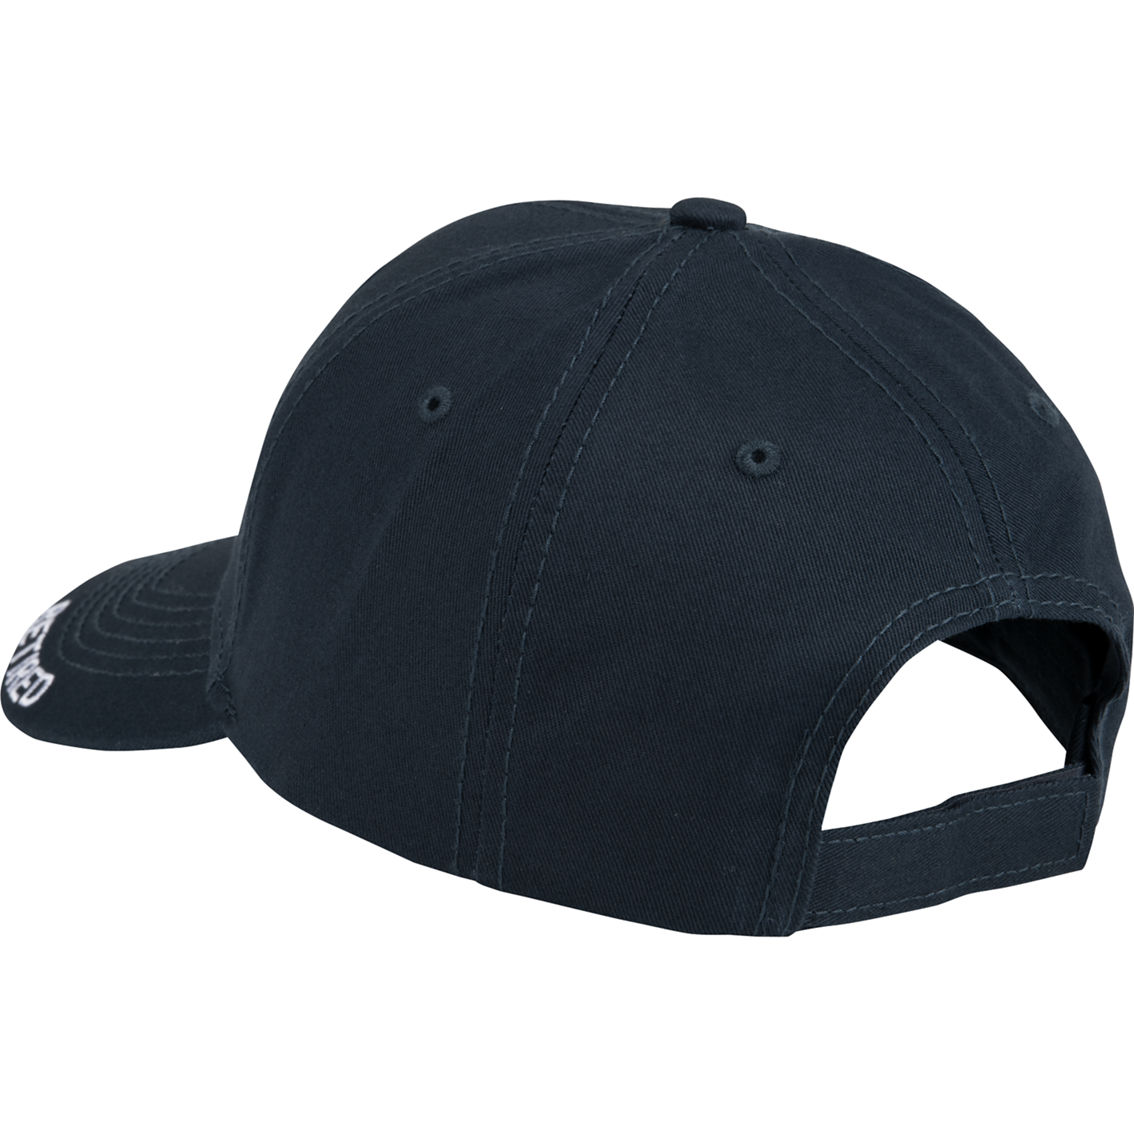 Blync Air Force Retired Twill Cap - Image 3 of 3